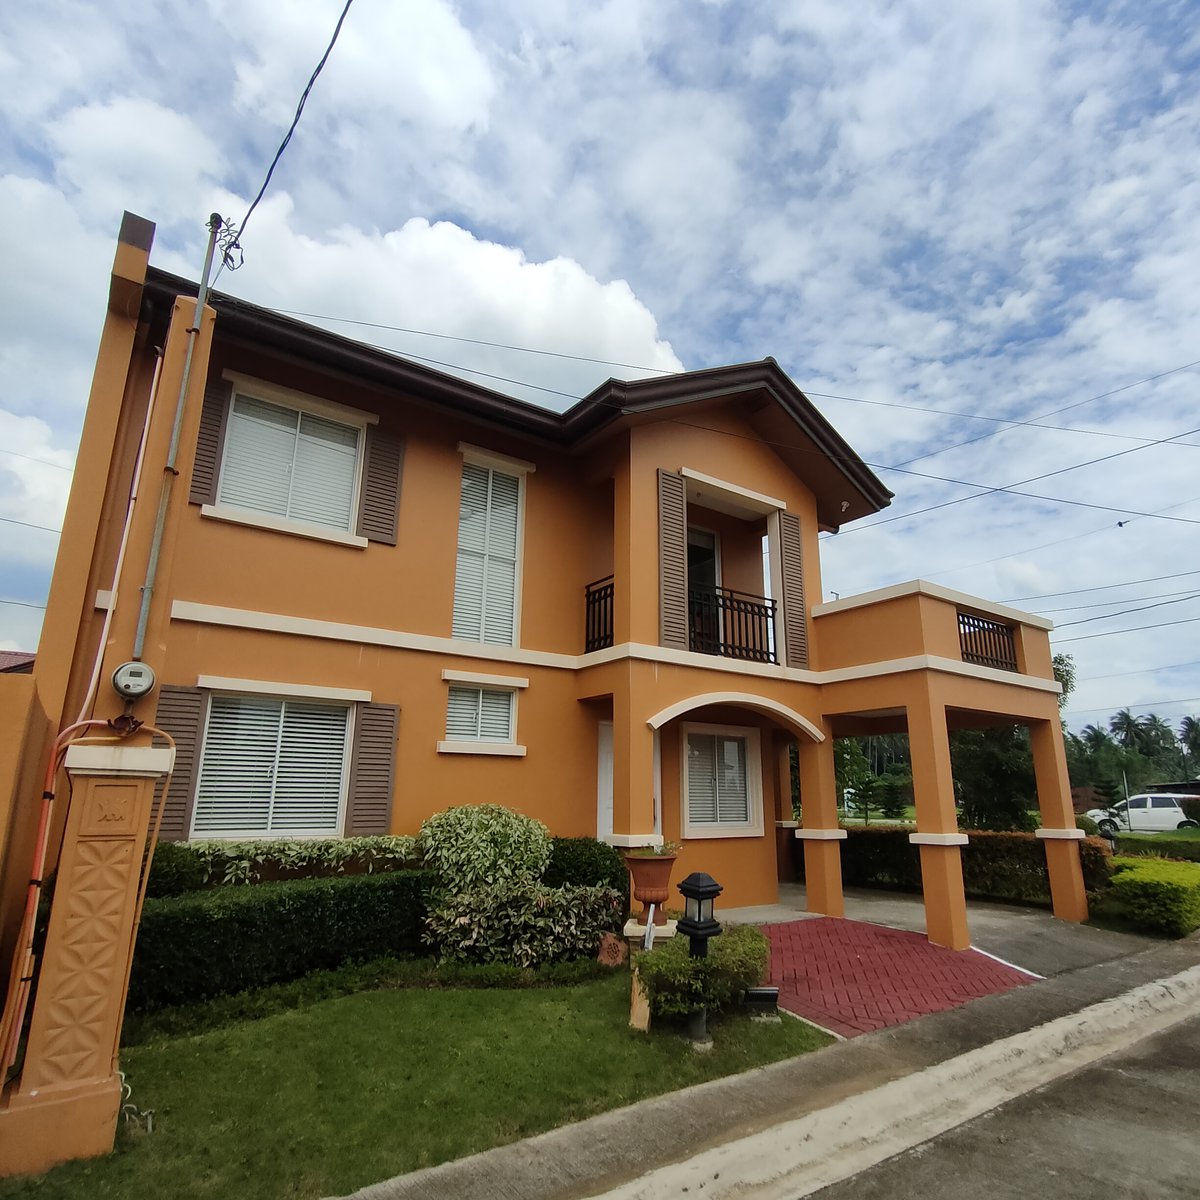 5-bedroom Single Detached House For Sale in Santo Tomas Batangas